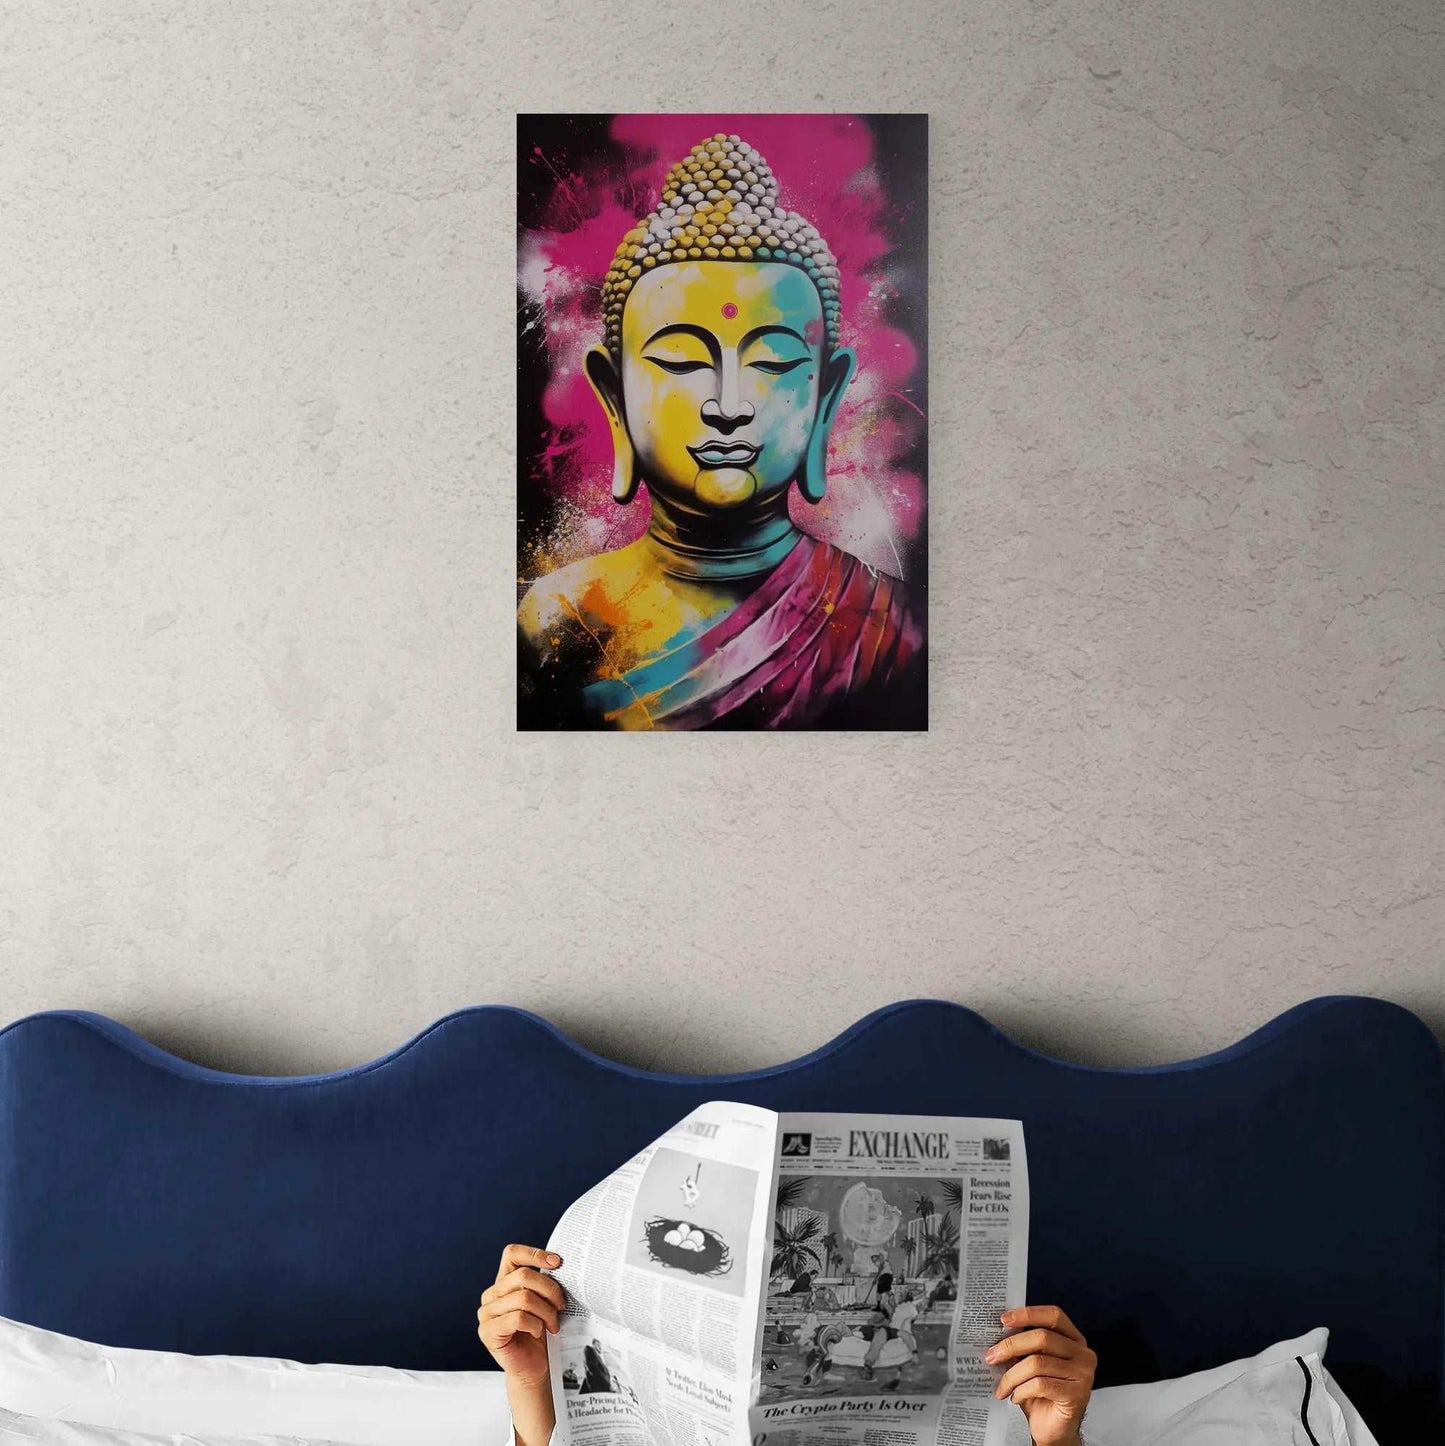 Person reading a newspaper in bed with a colorful Buddha painting in the background, creating a vibrant and thoughtful ambiance in a bedroom setting.